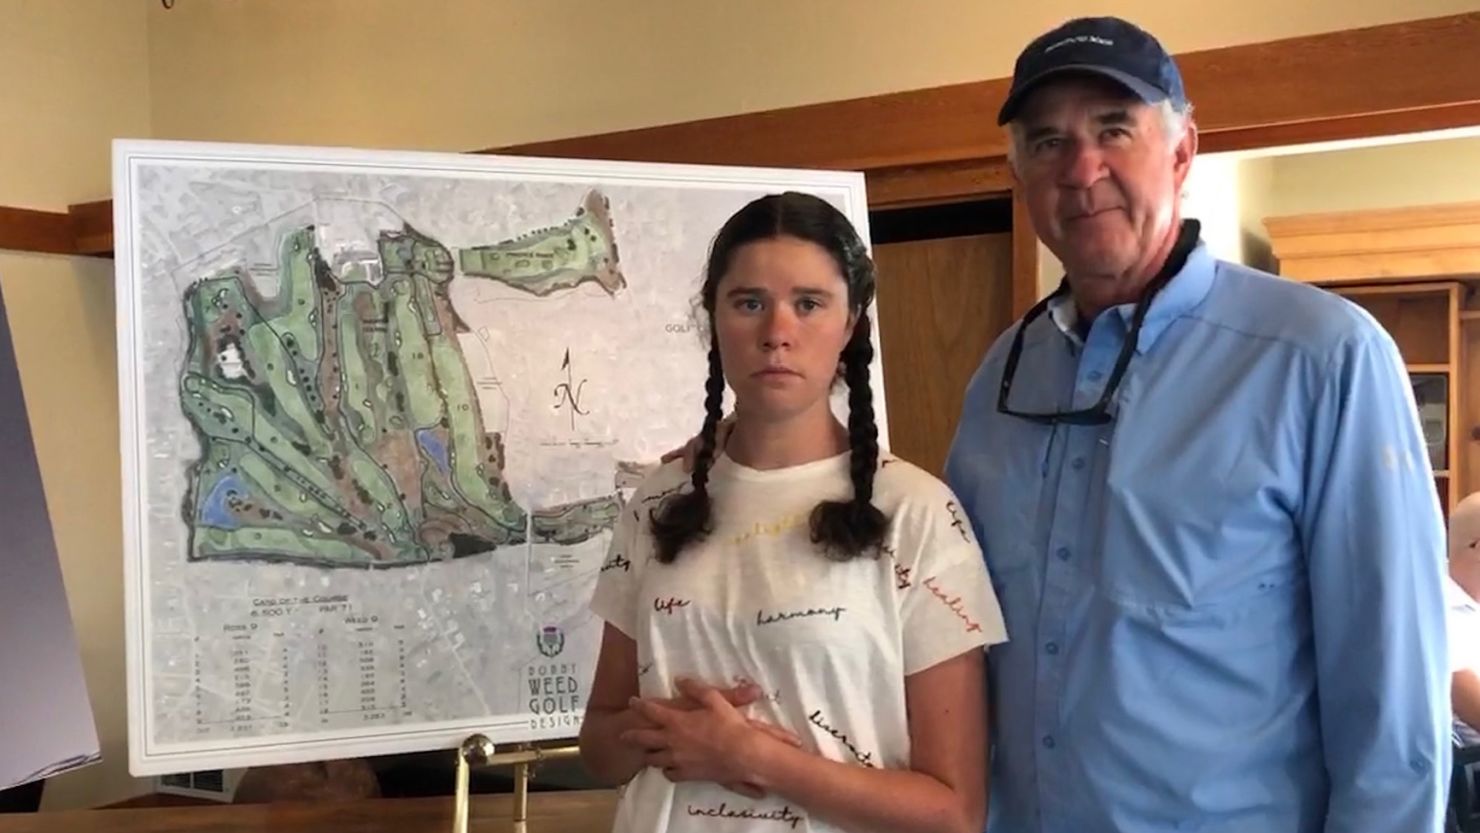 Lanier Weed (left) accompanies her father Bobby as he presents renovation plans for the Waynesville Inn and Golf Club, North Carolina in 2021.